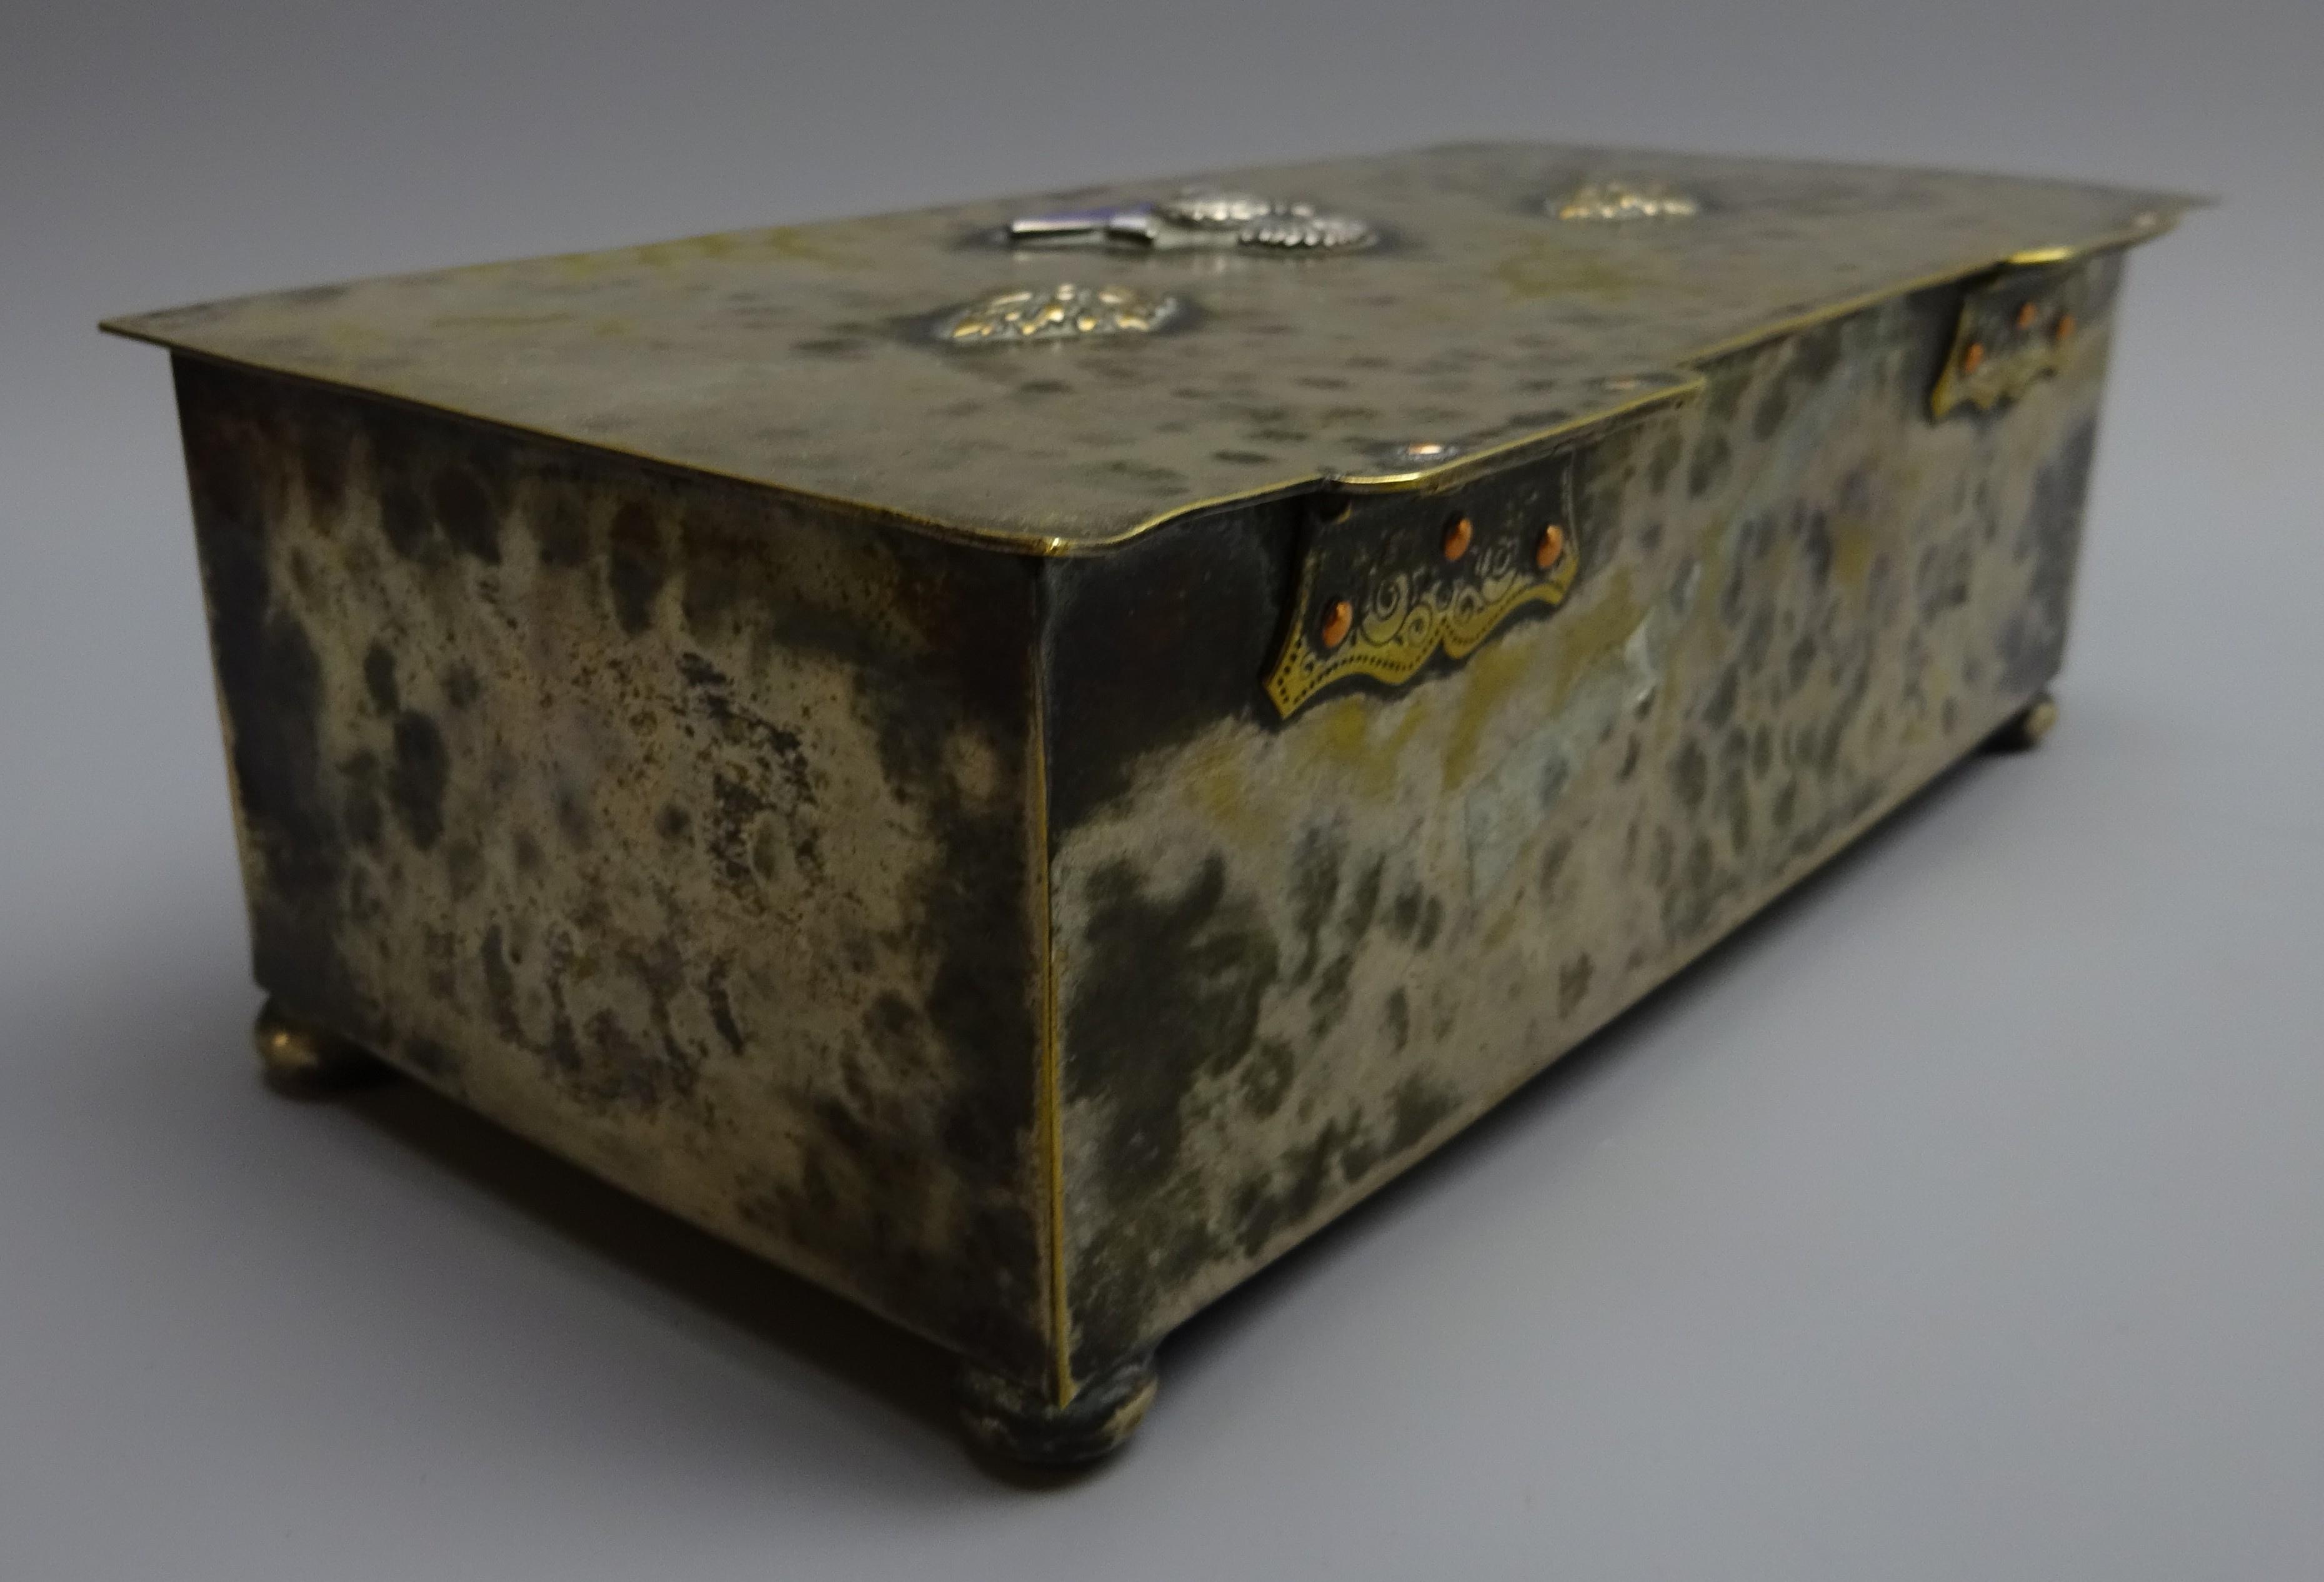 Lancashire Fusiliers table cigarette box, hammered silvered body with wood lined interior, - Image 6 of 7